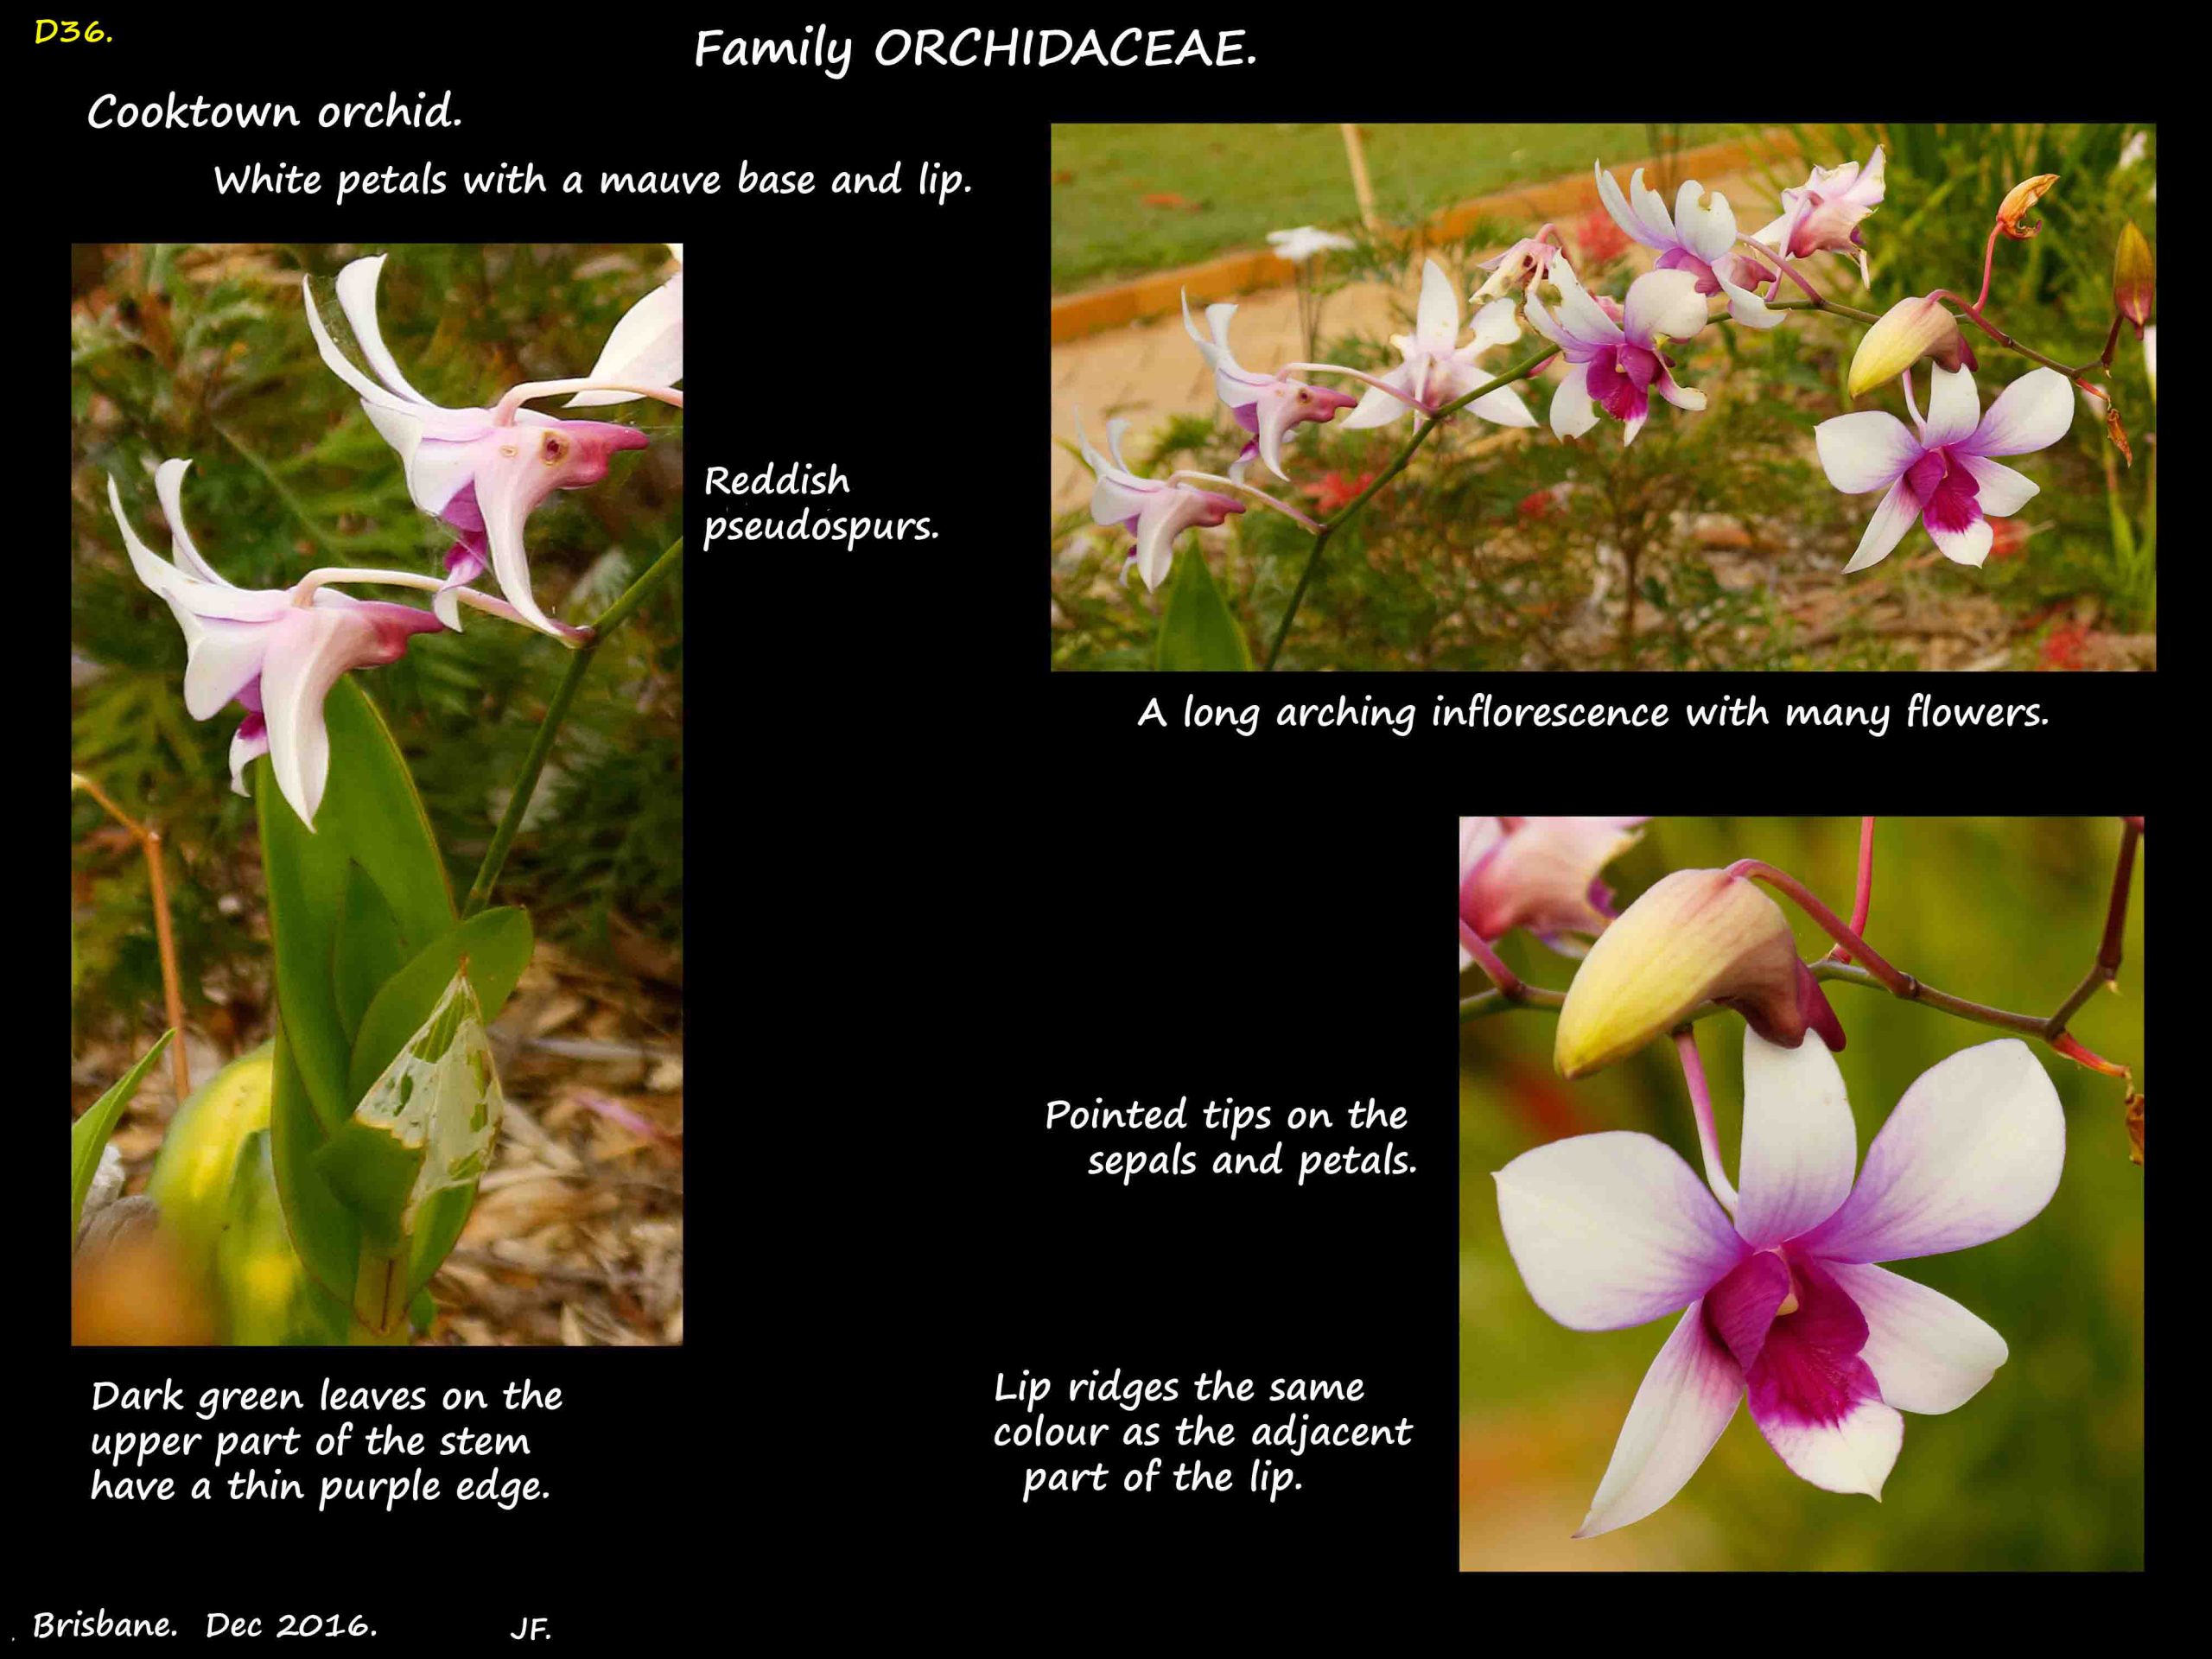 4 A white Cooktown orchid